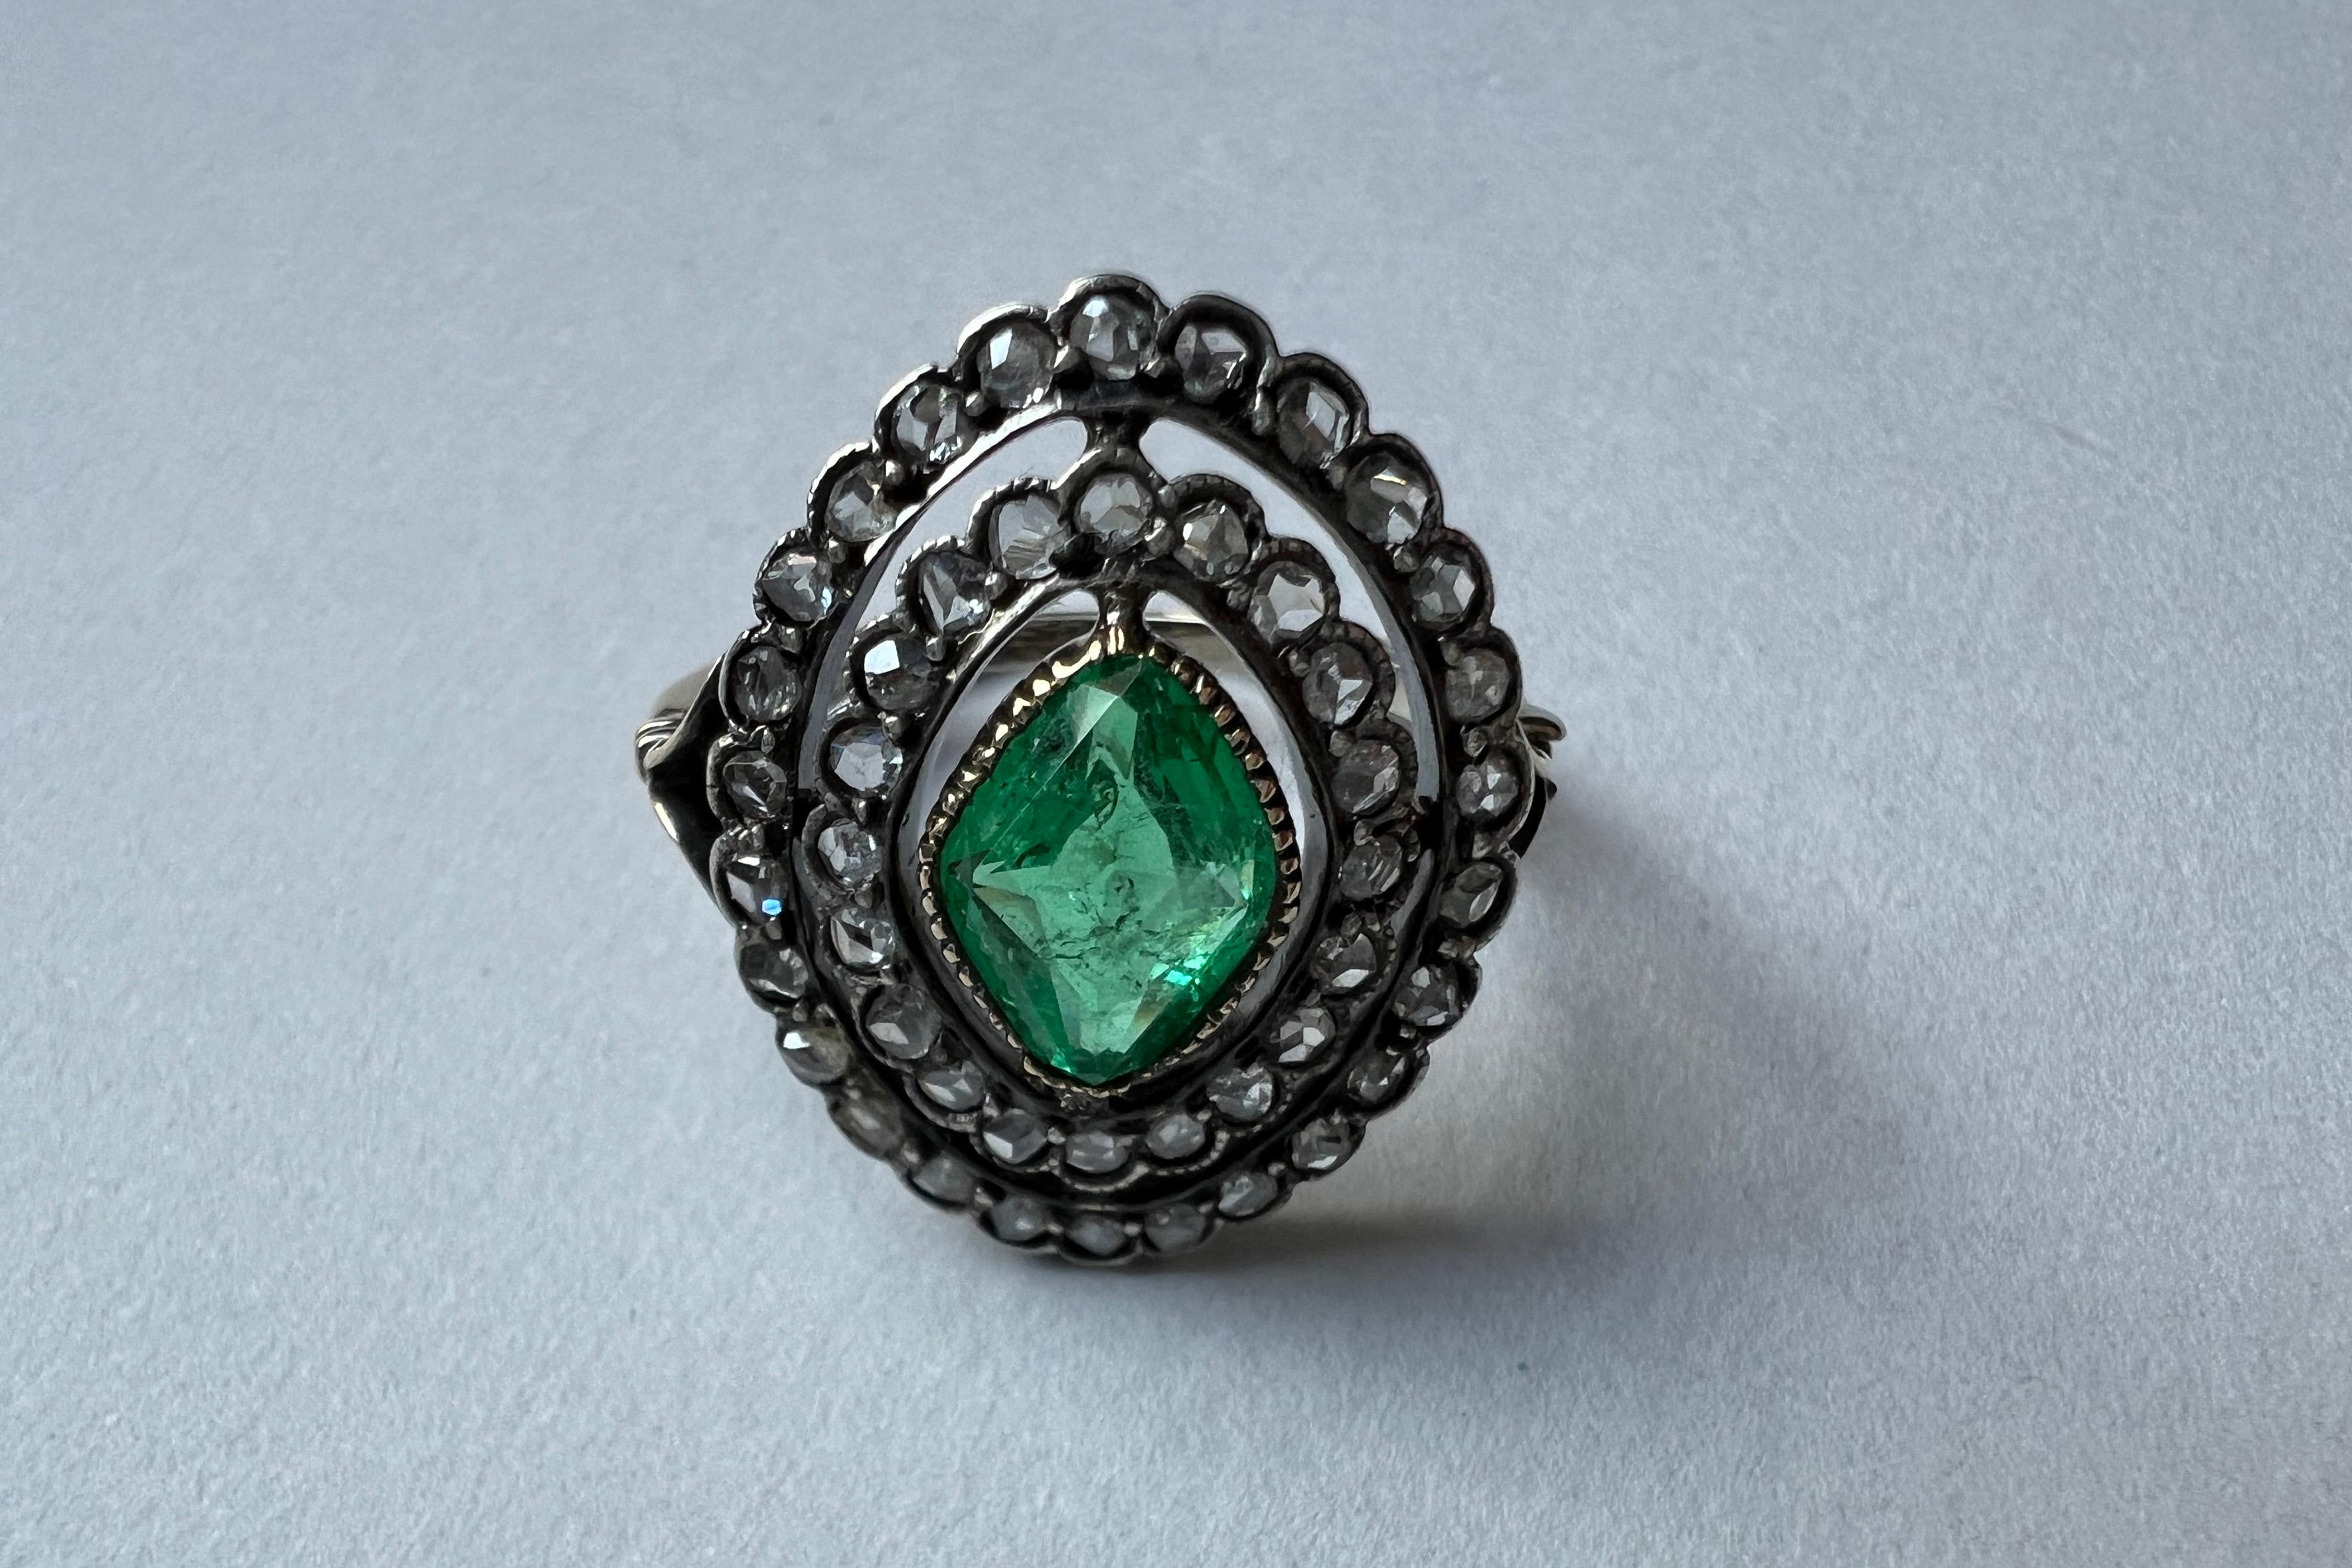 Antique Victorian Marquise Emerald cluster Diamonds Ring.
Dating from the late nineteenth century, the ring is crafted in 18kt yellow gold and silver. The double row of rose-cut diamonds for 0.69 ct aprox are set in a cluster with milligranate in